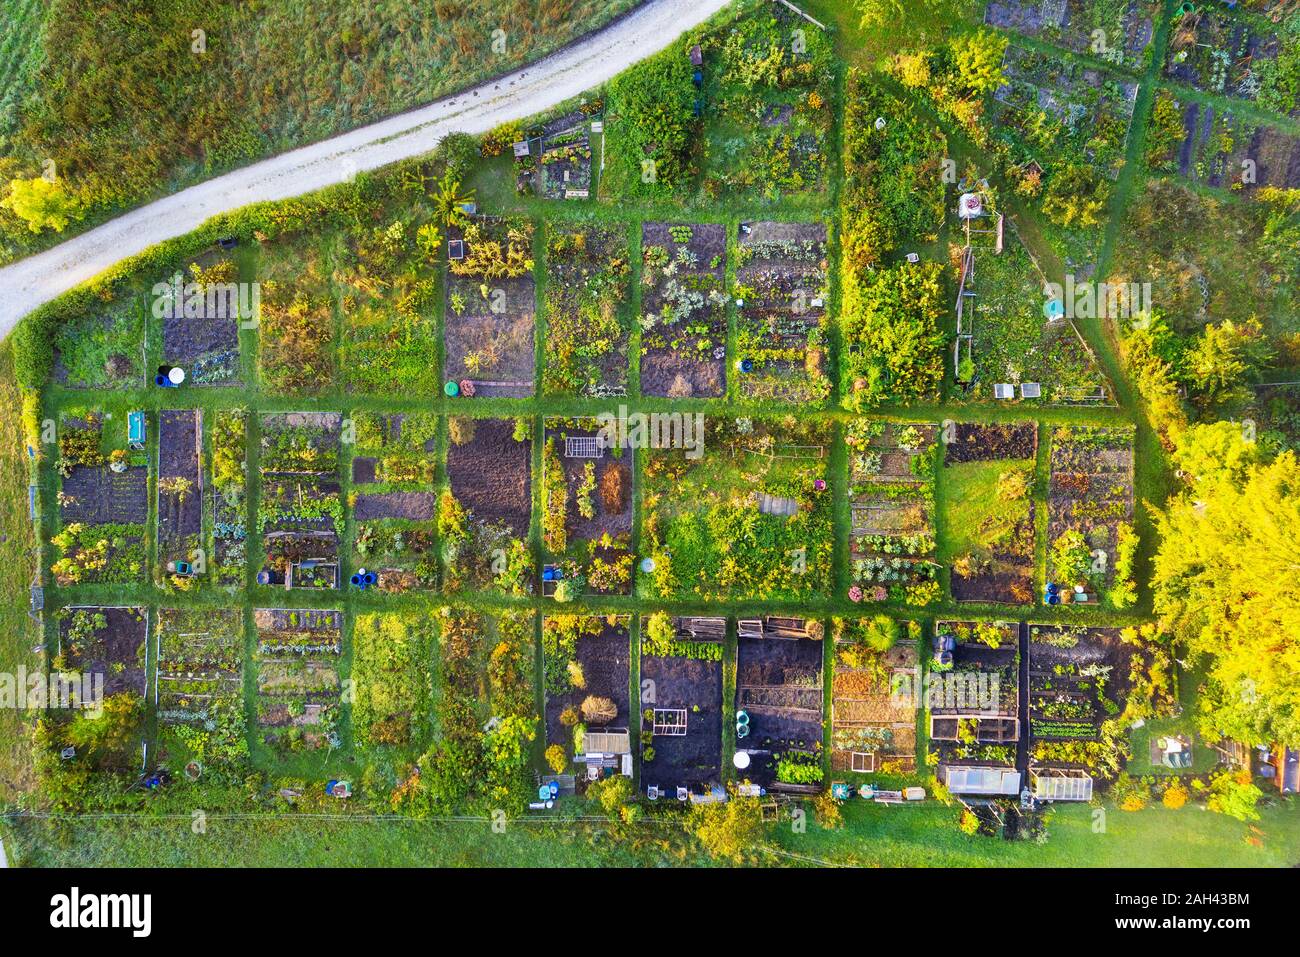 Germany, Bavaria, Geretsried, Aerial view of rows of green countryside gardens Stock Photo